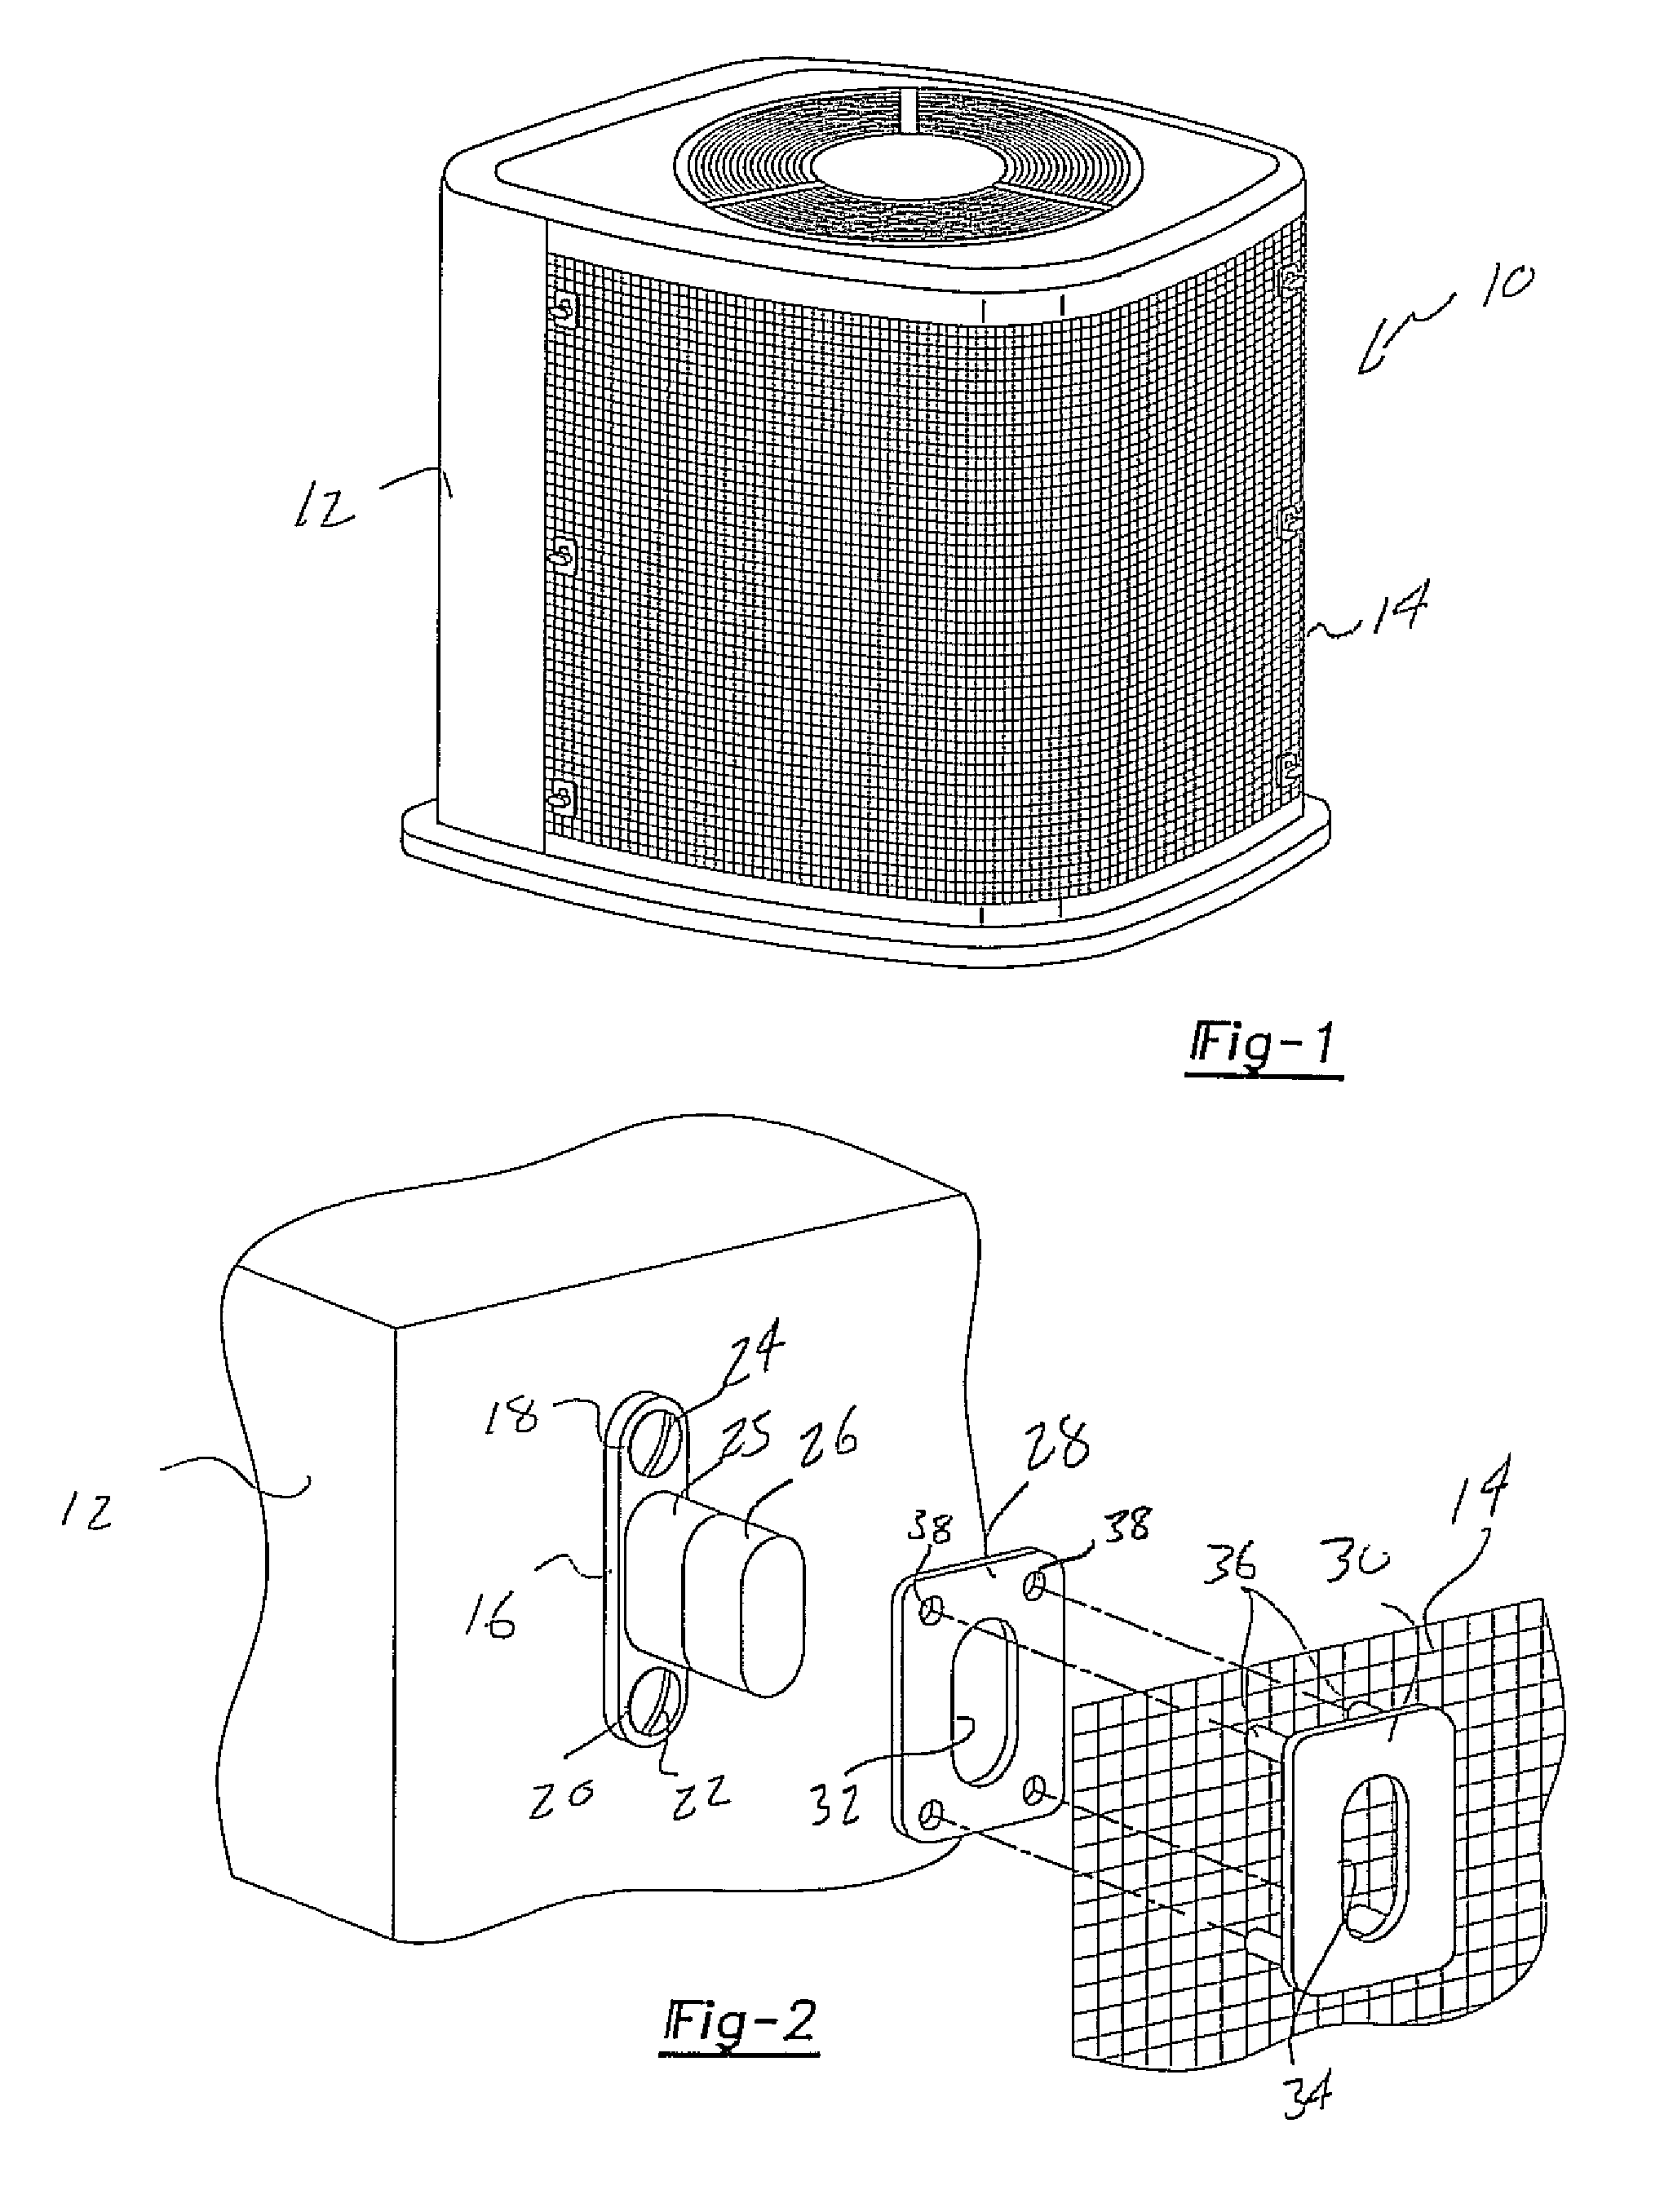 Filter installation kit for use with such as an air condensing unit